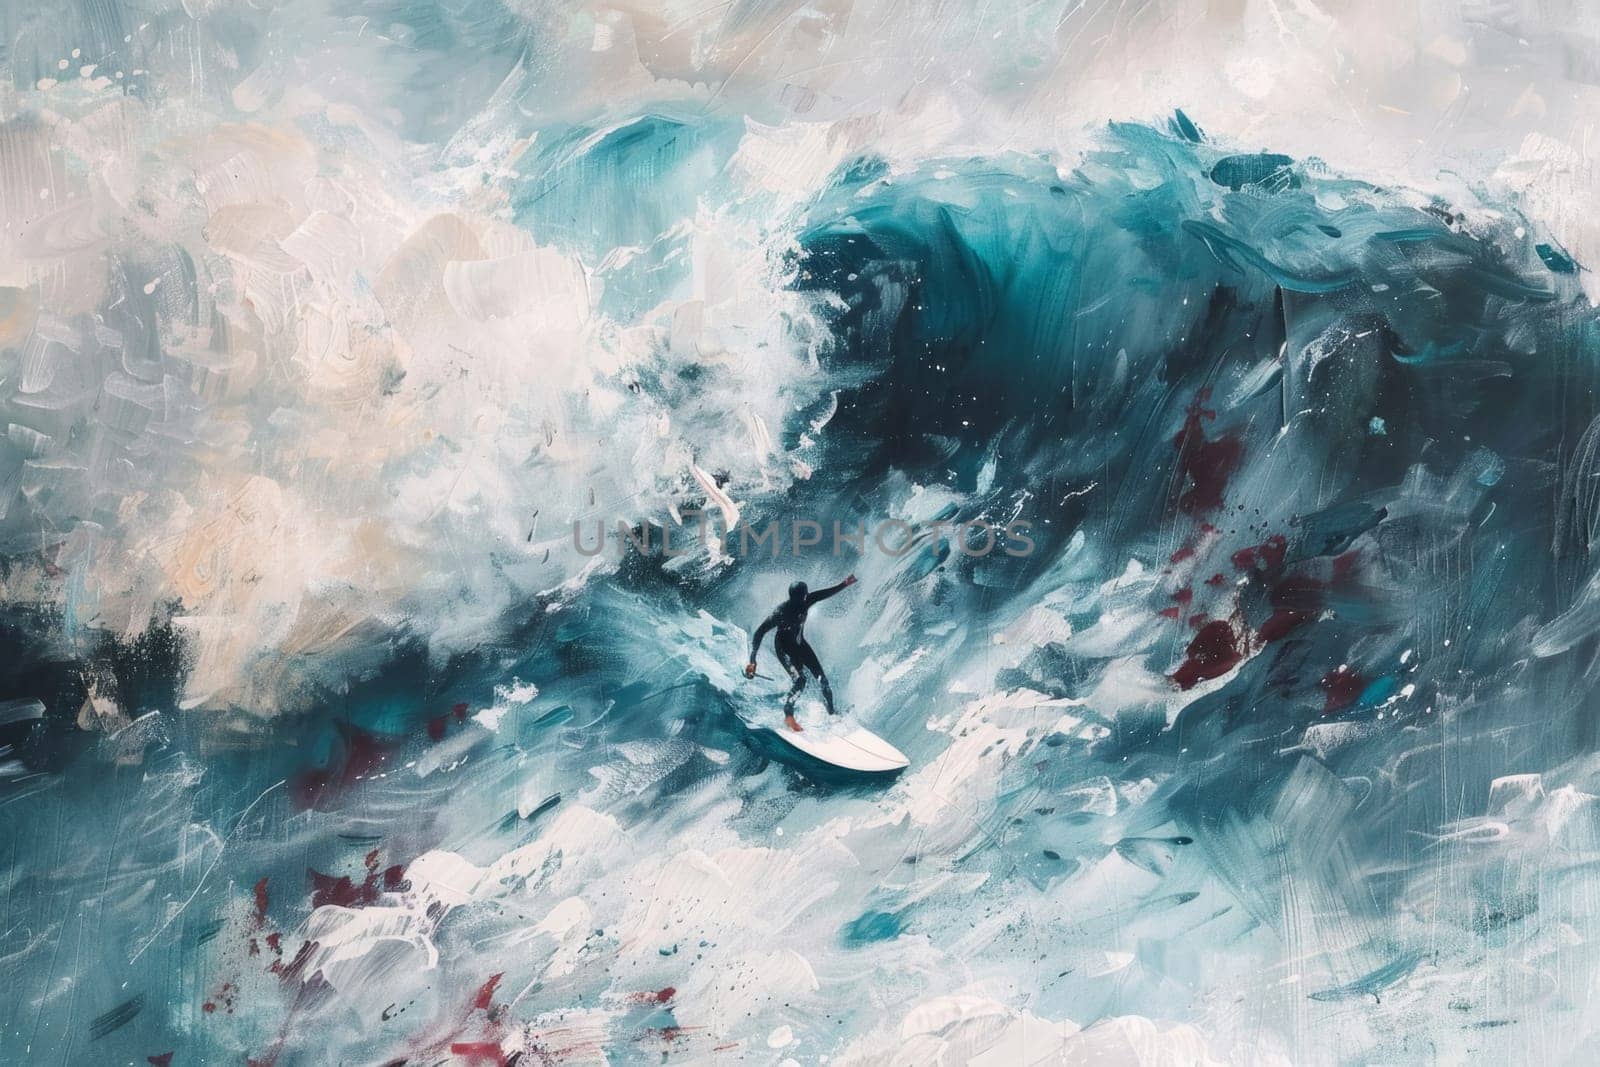 An expressionistic painting portrays the dynamic movement of a surfer riding a tumultuous wave, invoking a sense of passion and risk